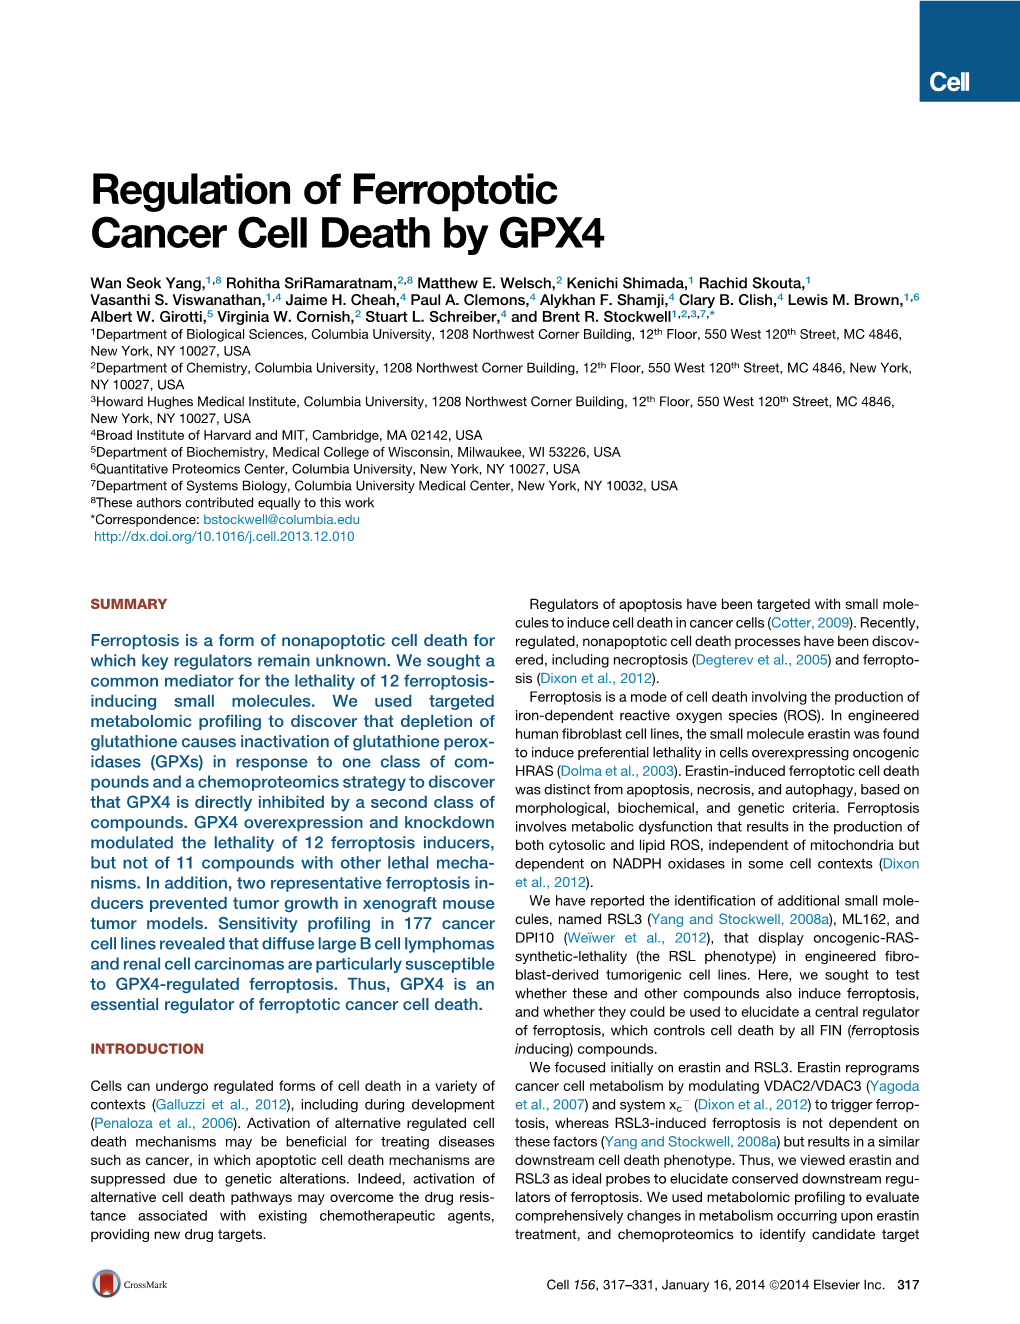 Regulation of Ferroptotic Cancer Cell Death by GPX4